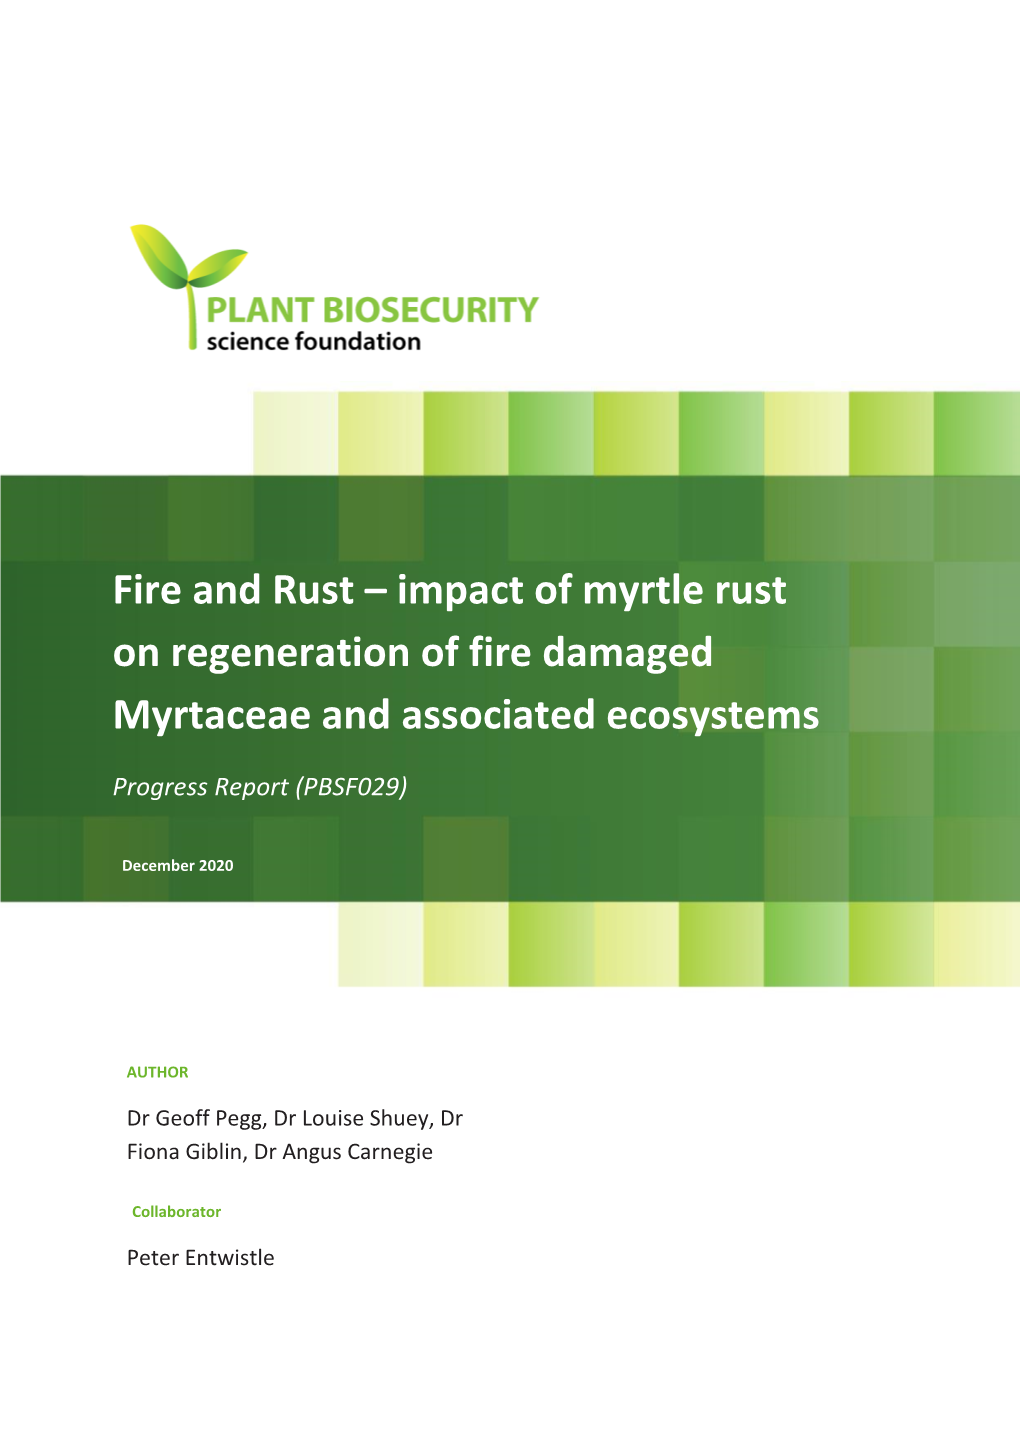 Fire and Rust – Impact of Myrtle Rust on Regeneration of Fire Damaged Myrtaceae and Associated Ecosystems